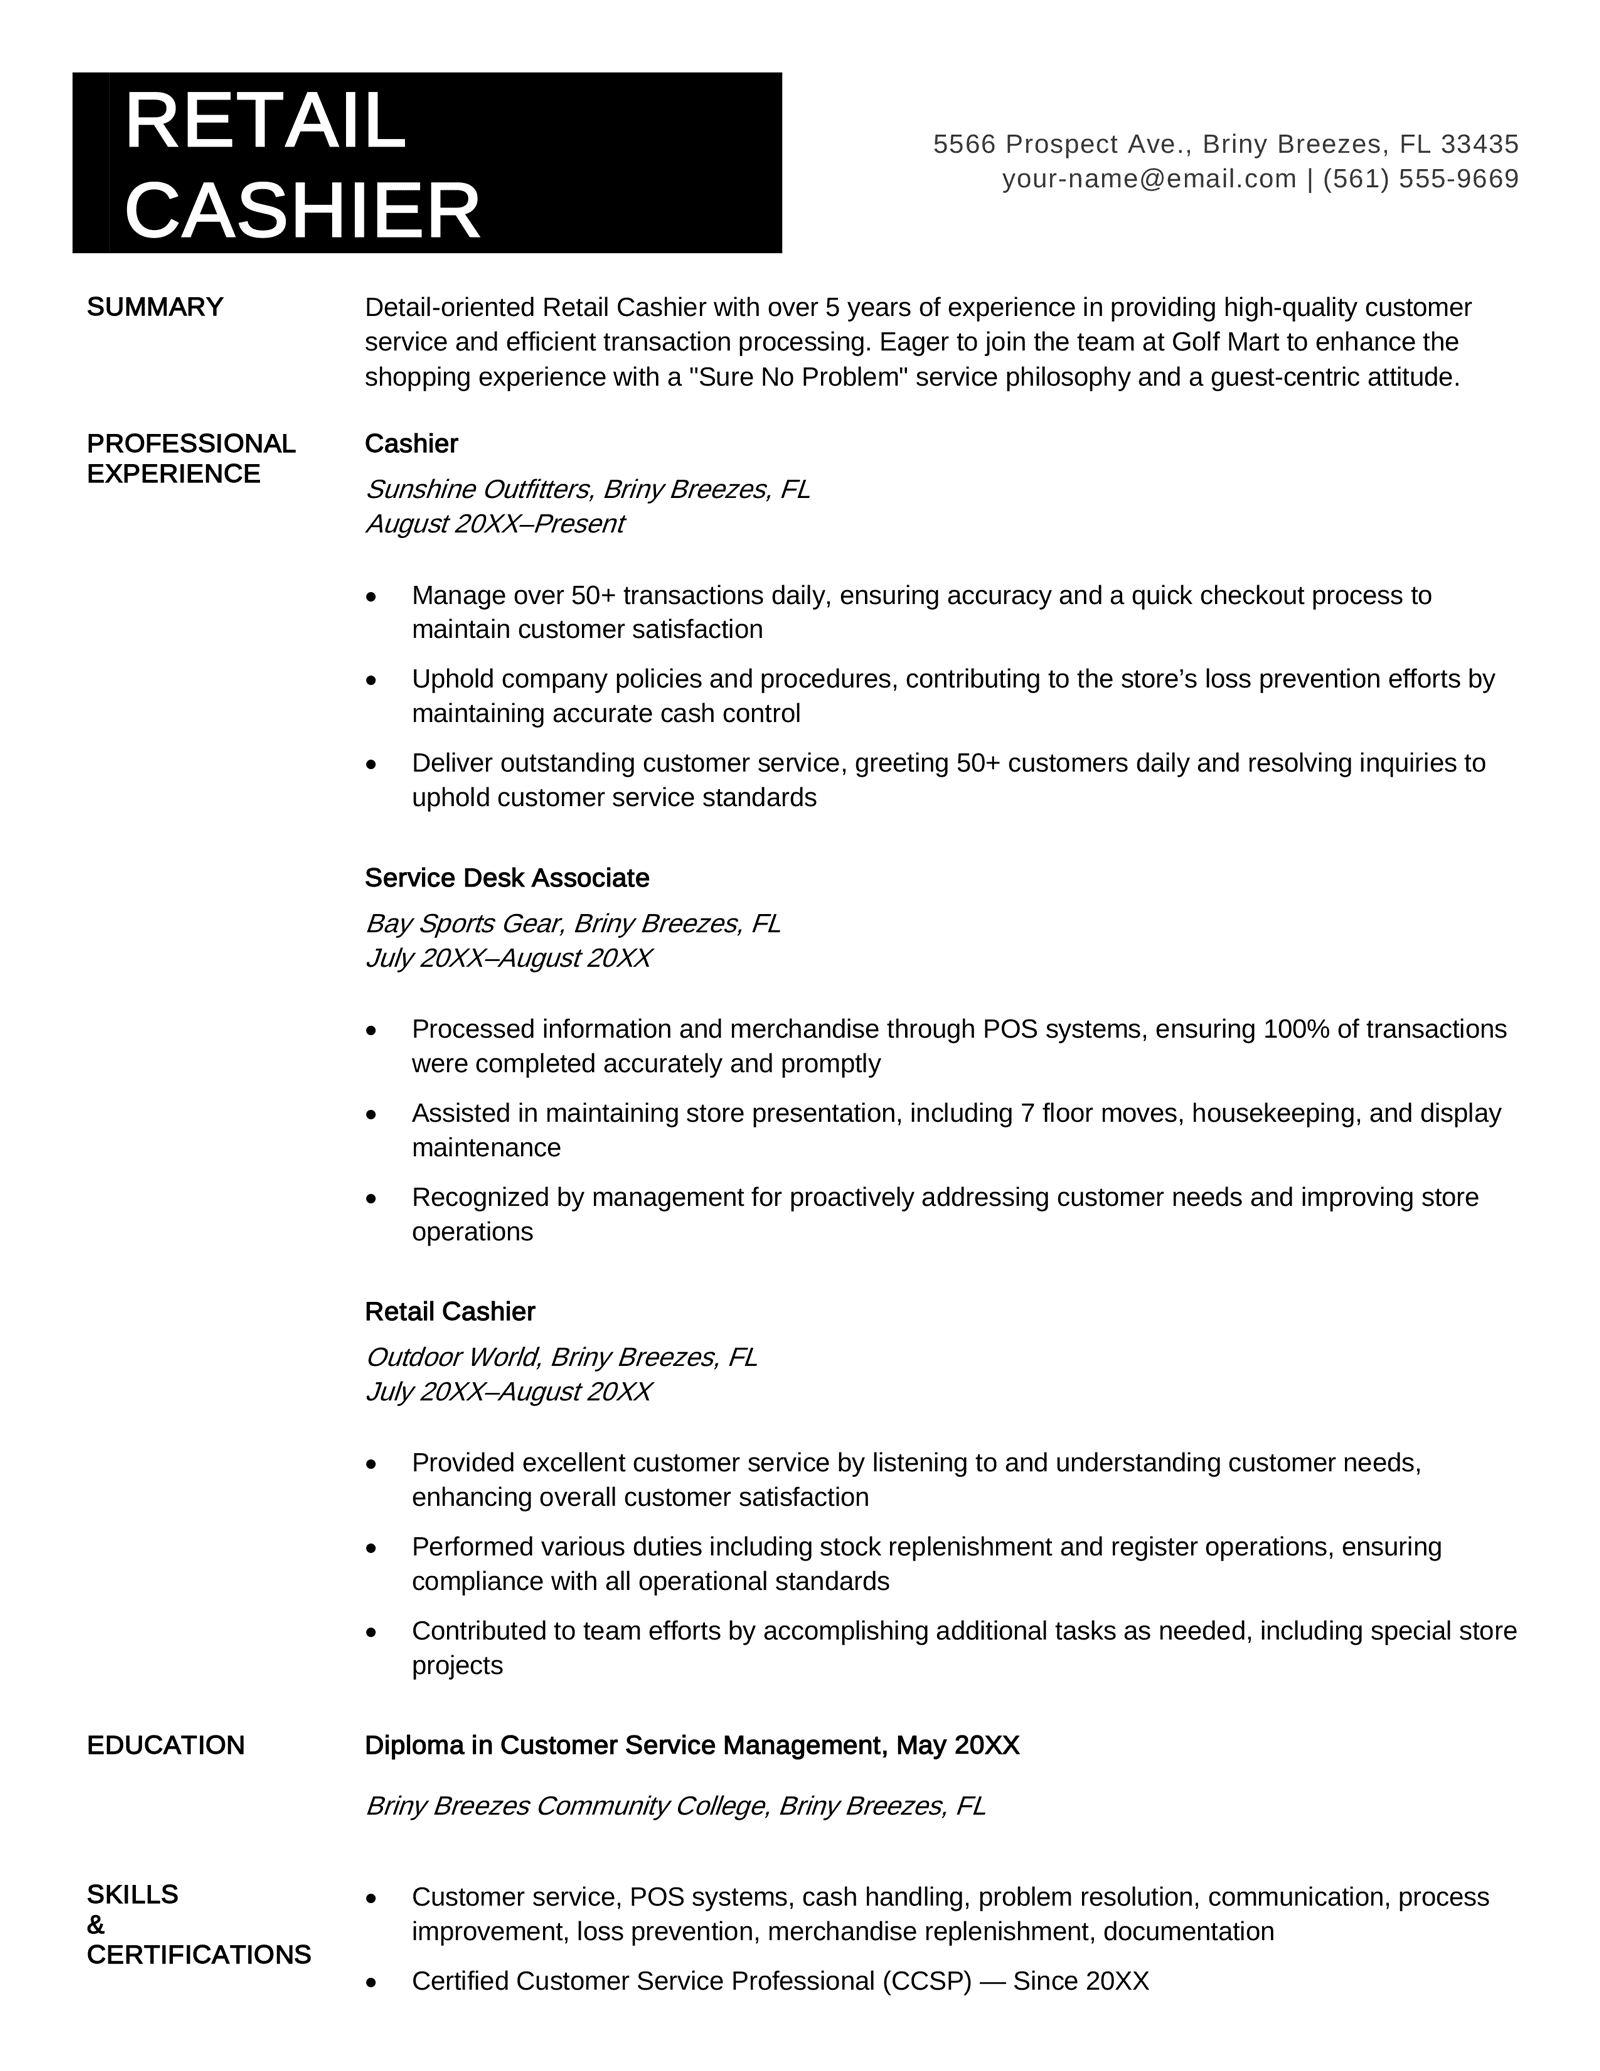 A retail casier resume that uses a black and white color scheme and has a combined skills and certifications section.